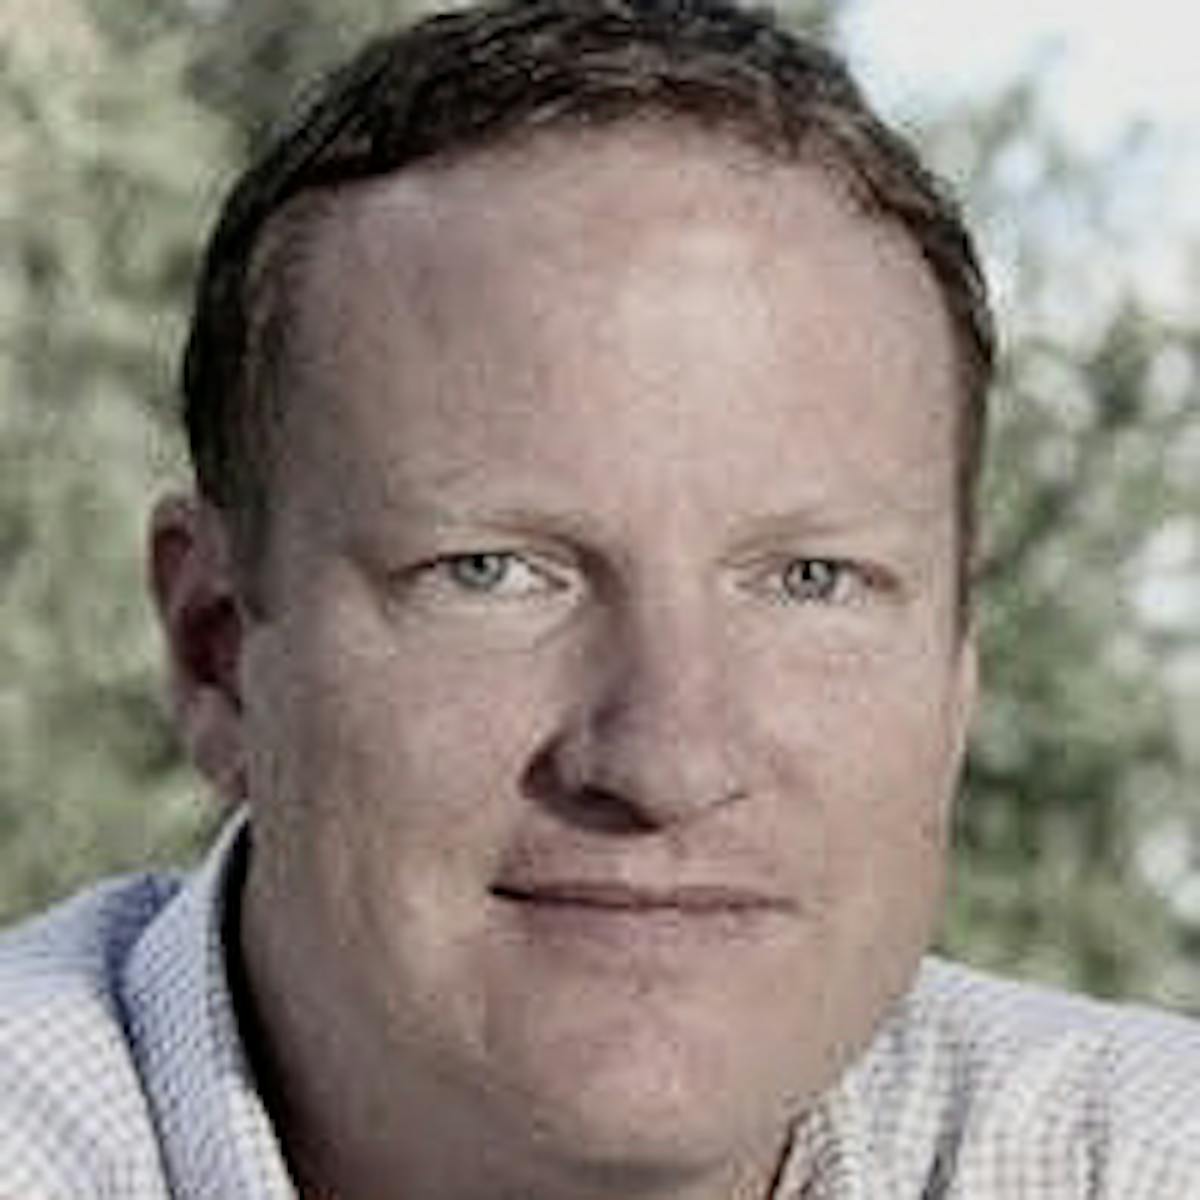 Brian O'Donnell